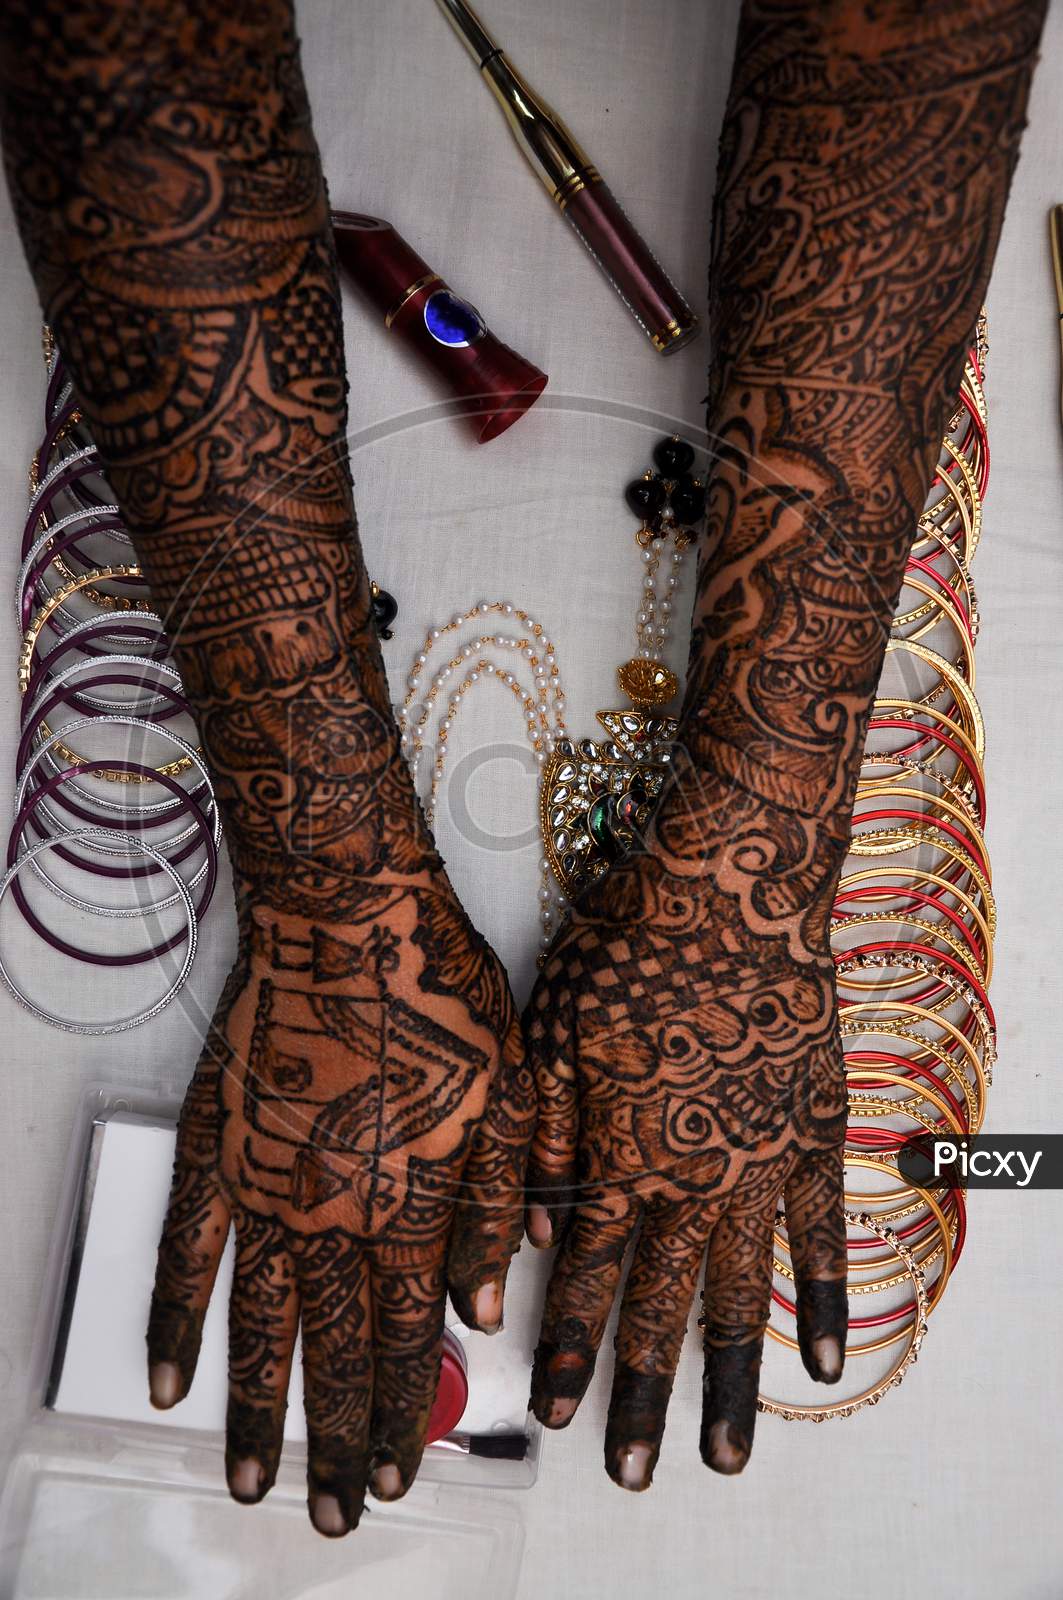 Dangerous 'black henna' tattoos leaving Bali tourists with permanent scars